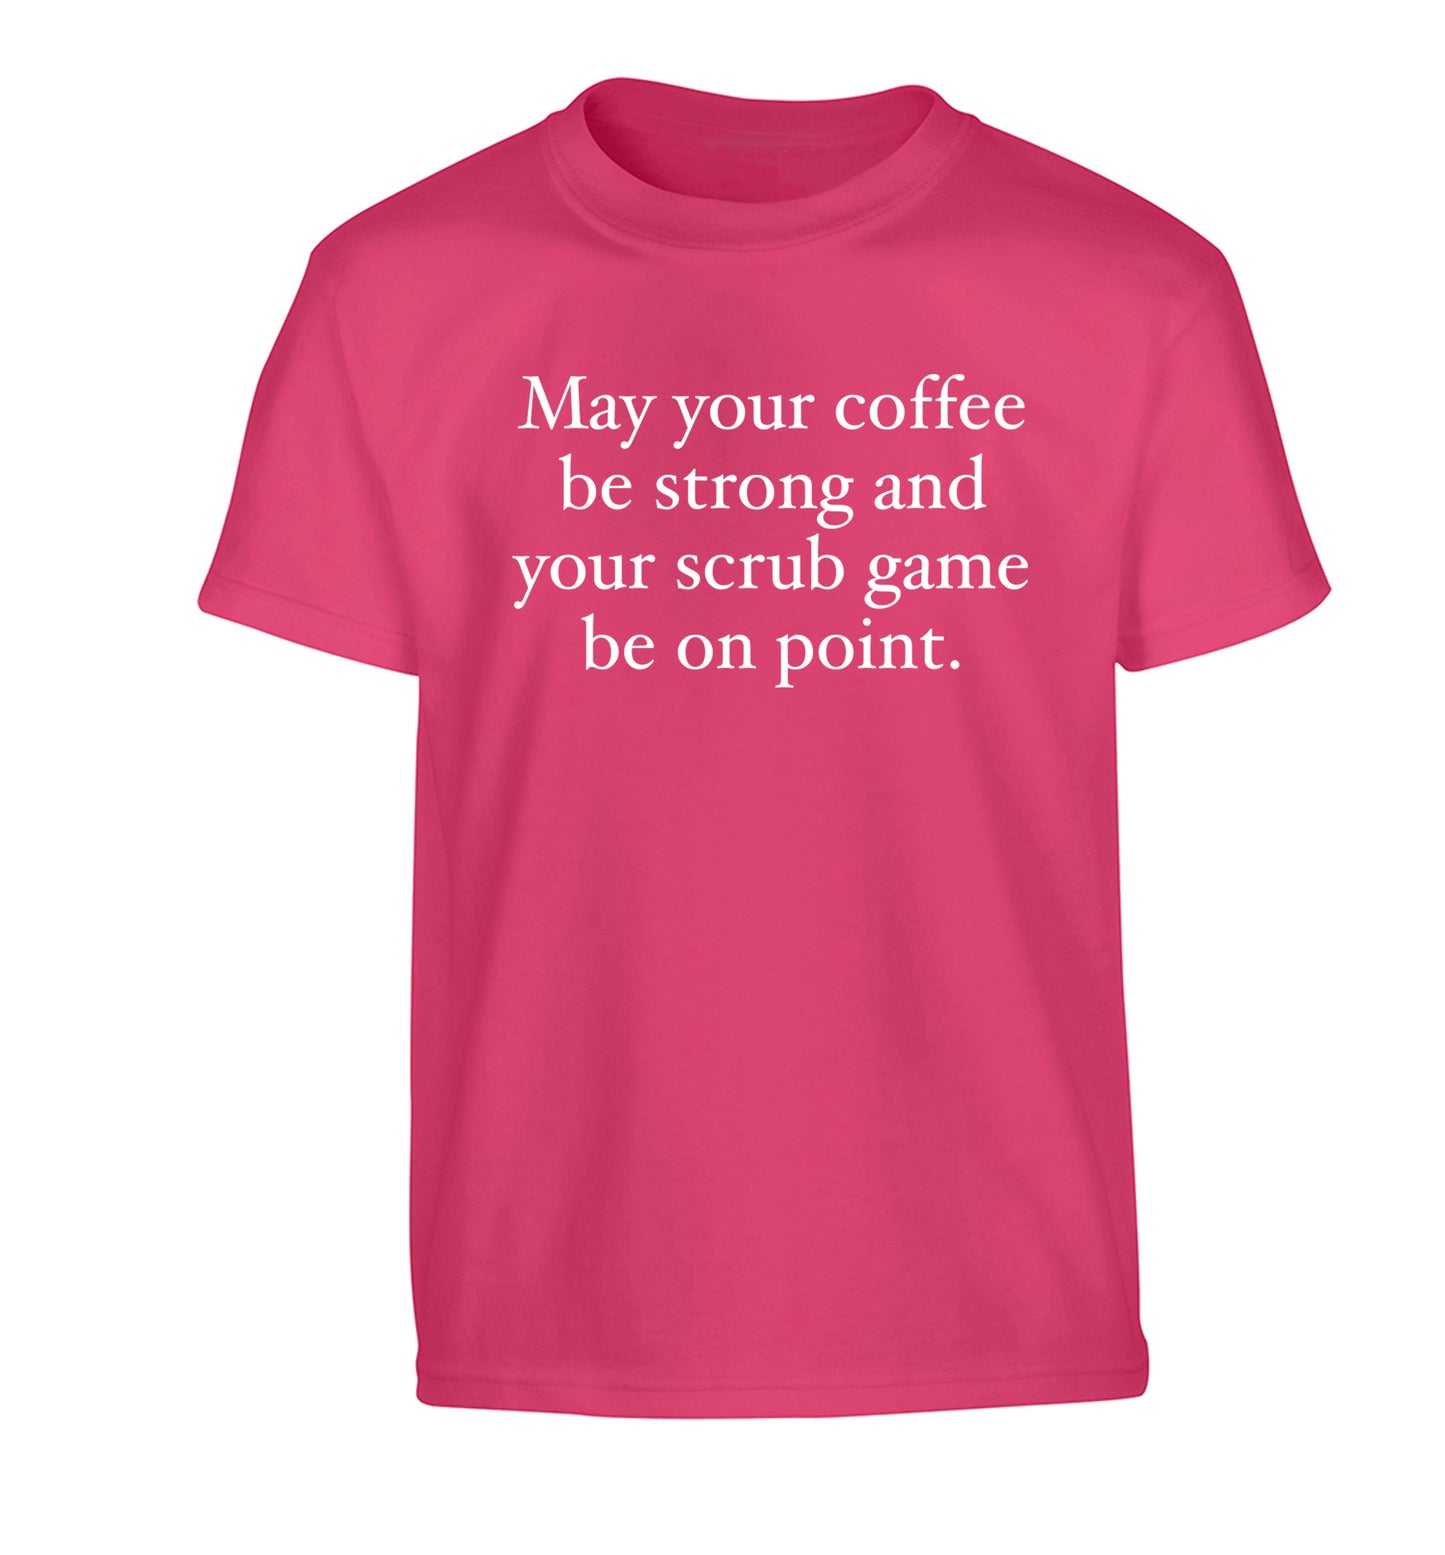 May your caffeine be strong and your scrub game be on point Children's pink Tshirt 12-14 Years